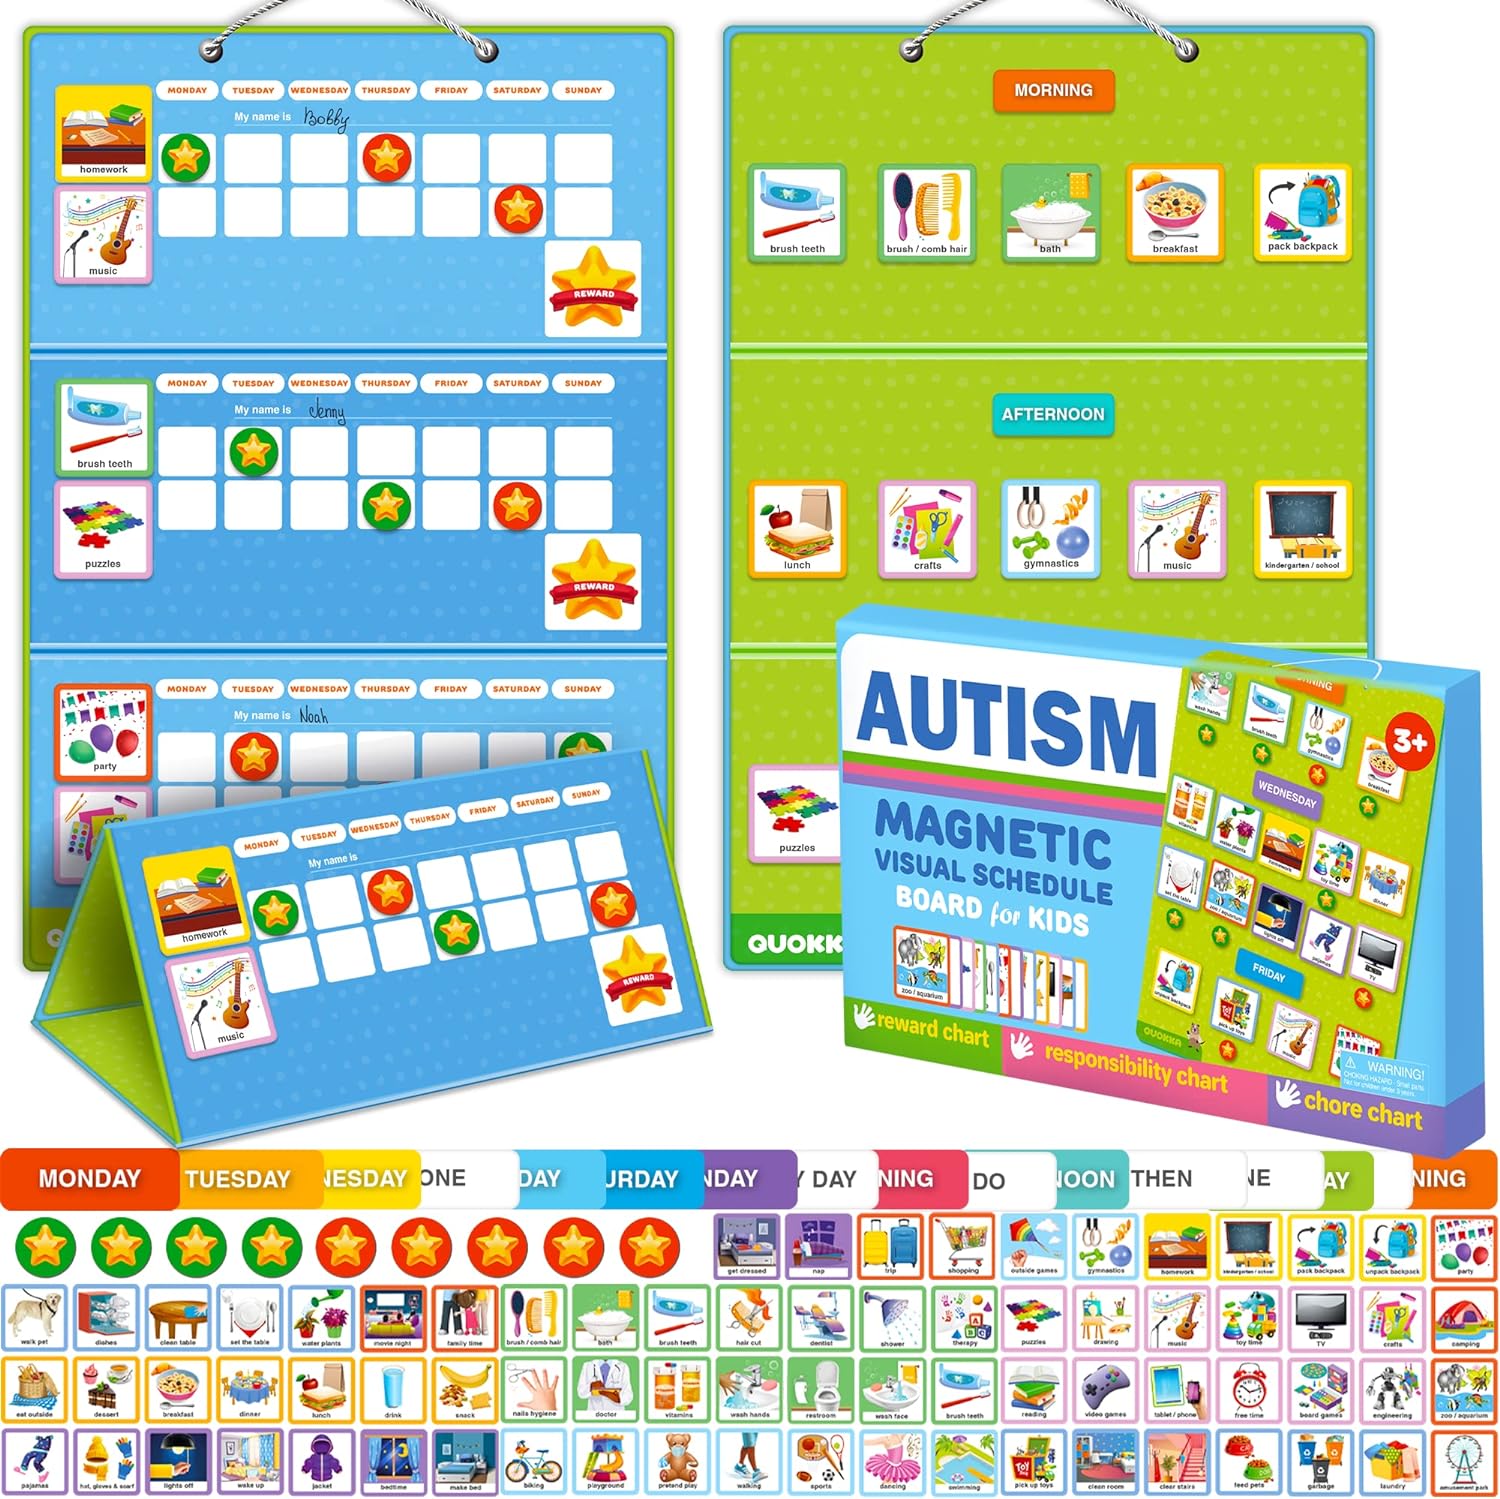 Reward Chore Chart for Multiple Kids - Behavior Routine Toy for Autistic Children Age 5-7 ADHD Tools